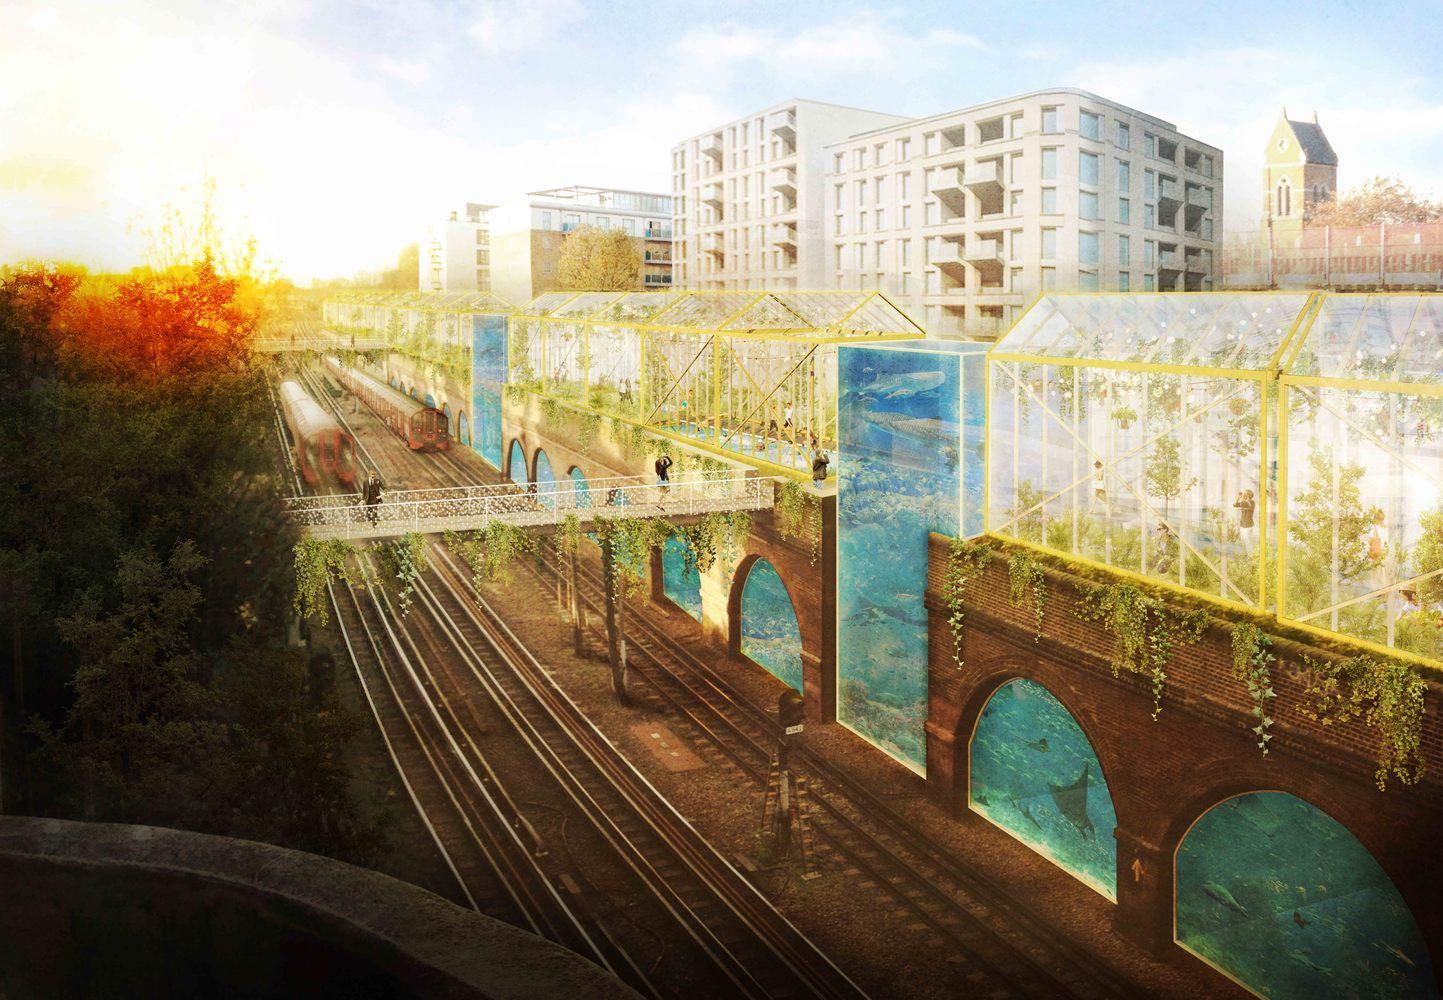 Bauchplan designs London High Line with aquaponics and swimming pools